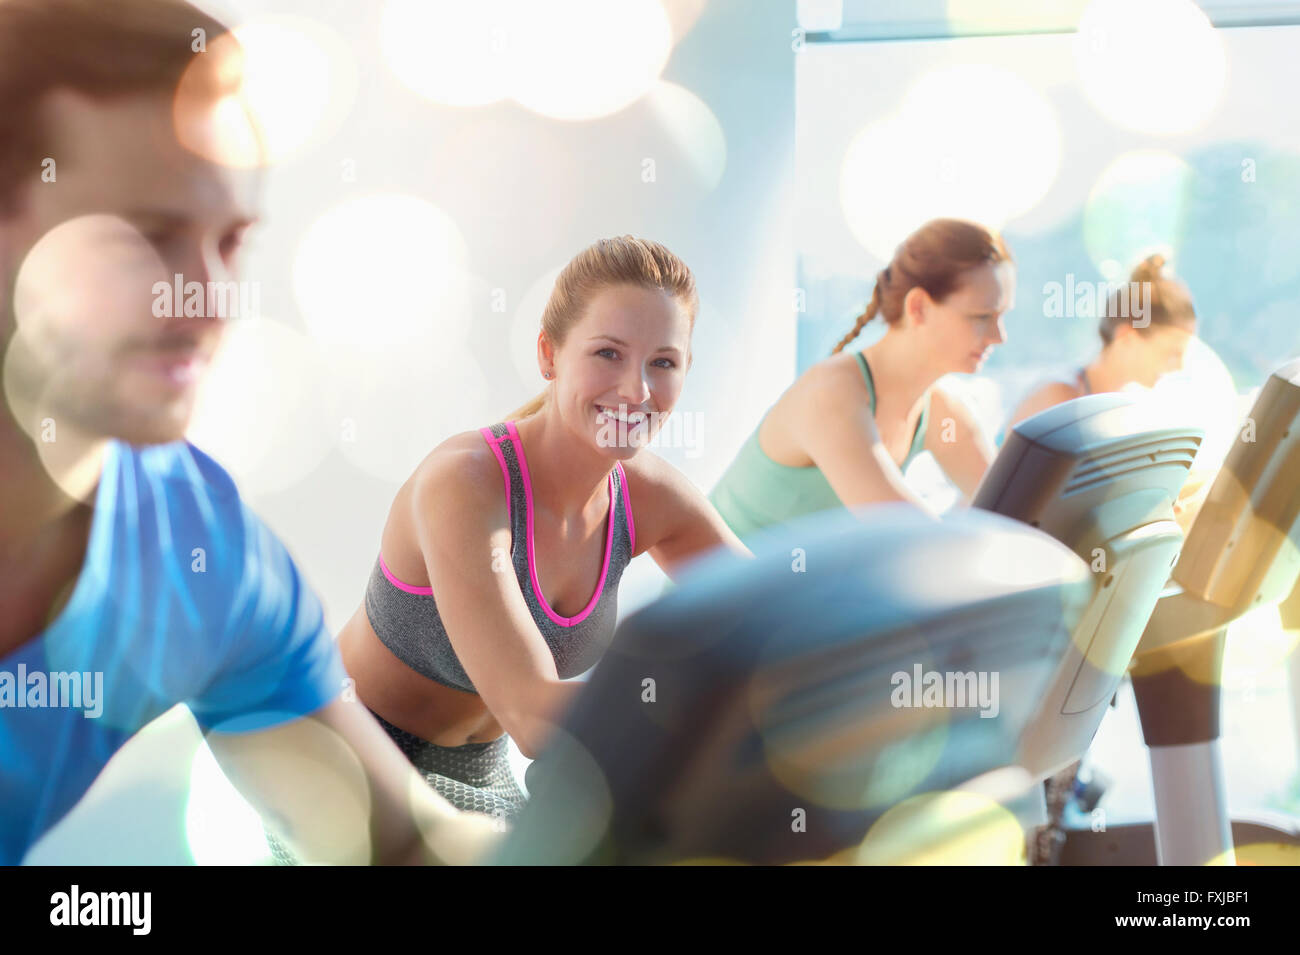 Smiling woman riding exercise bike at gym Banque D'Images